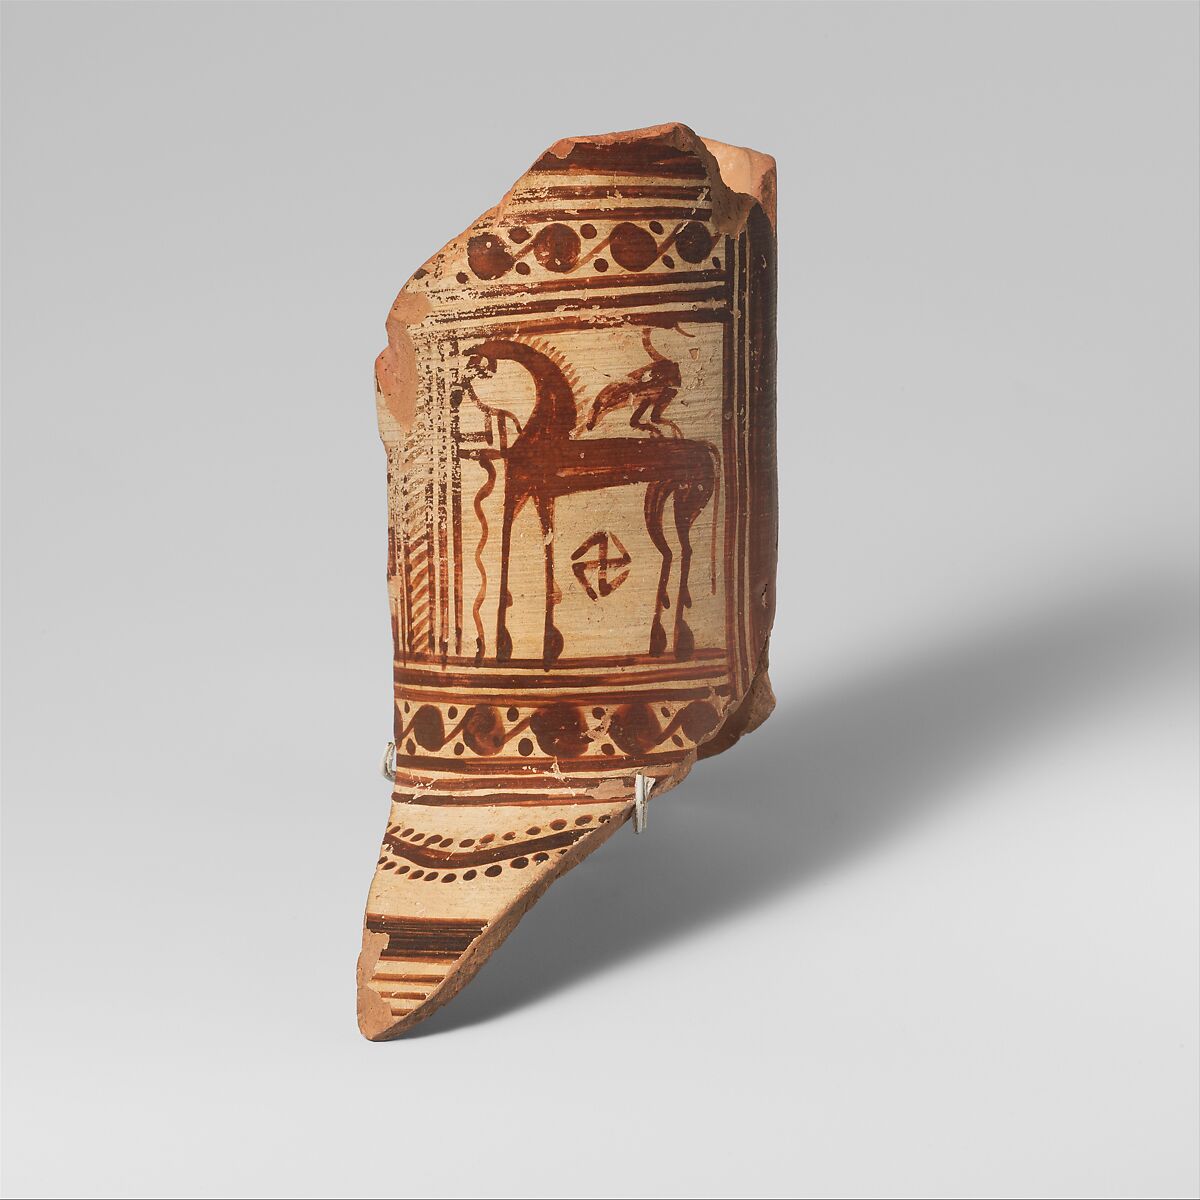 Fragment of a terracotta oinochoe (jug), Attributed to the Cesnola Painter, Terracotta, Greek, Euboean 